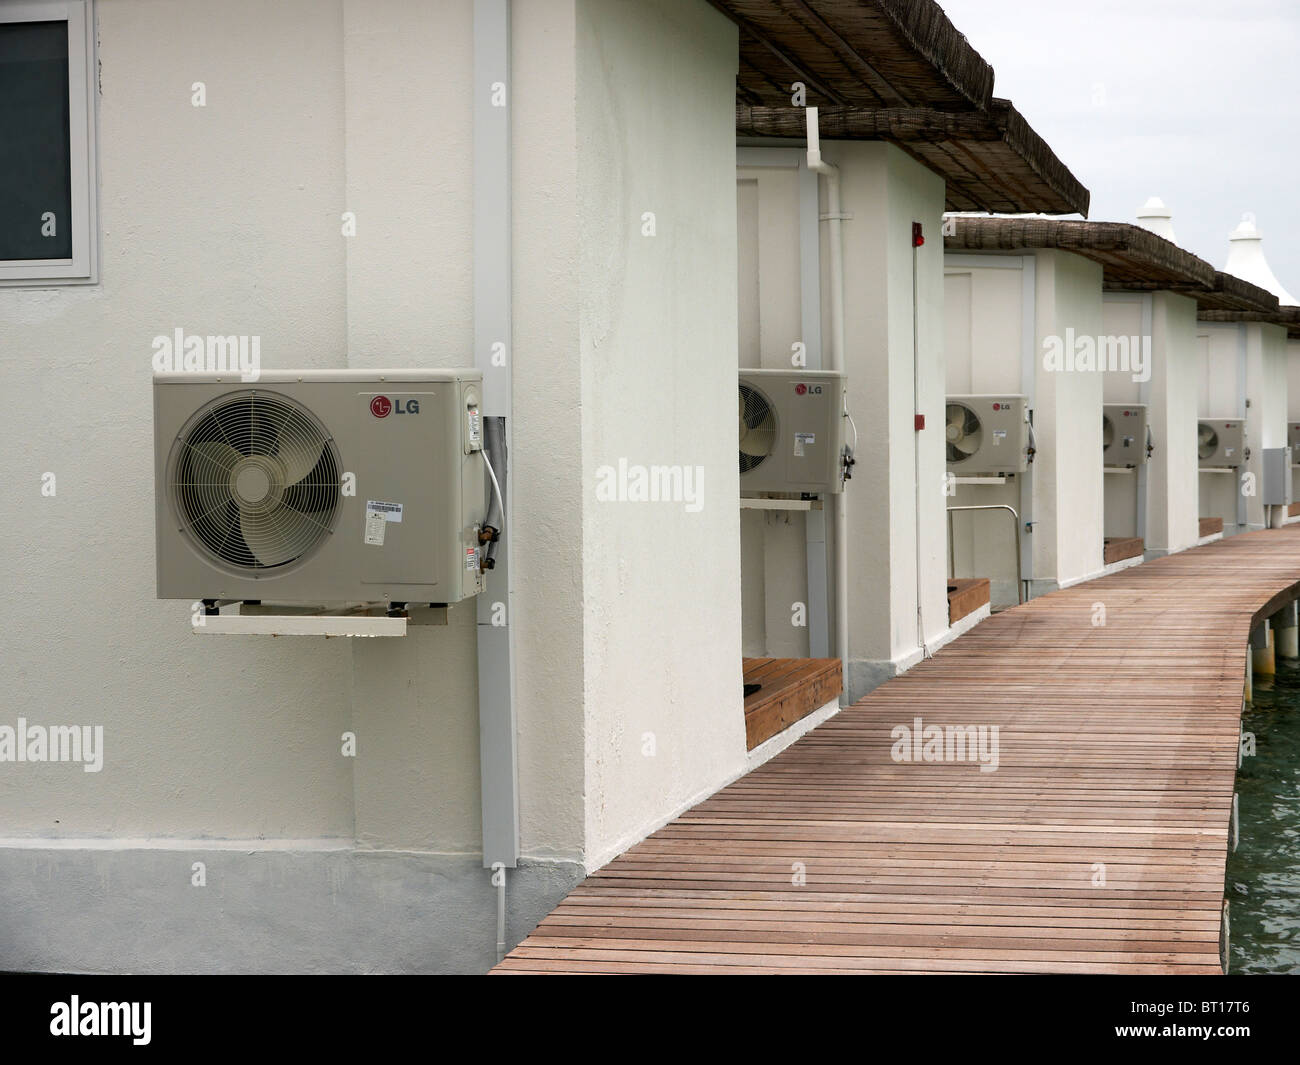 LG Air conditioning units on walls of water bungalows in Indian ocean Stock Photo